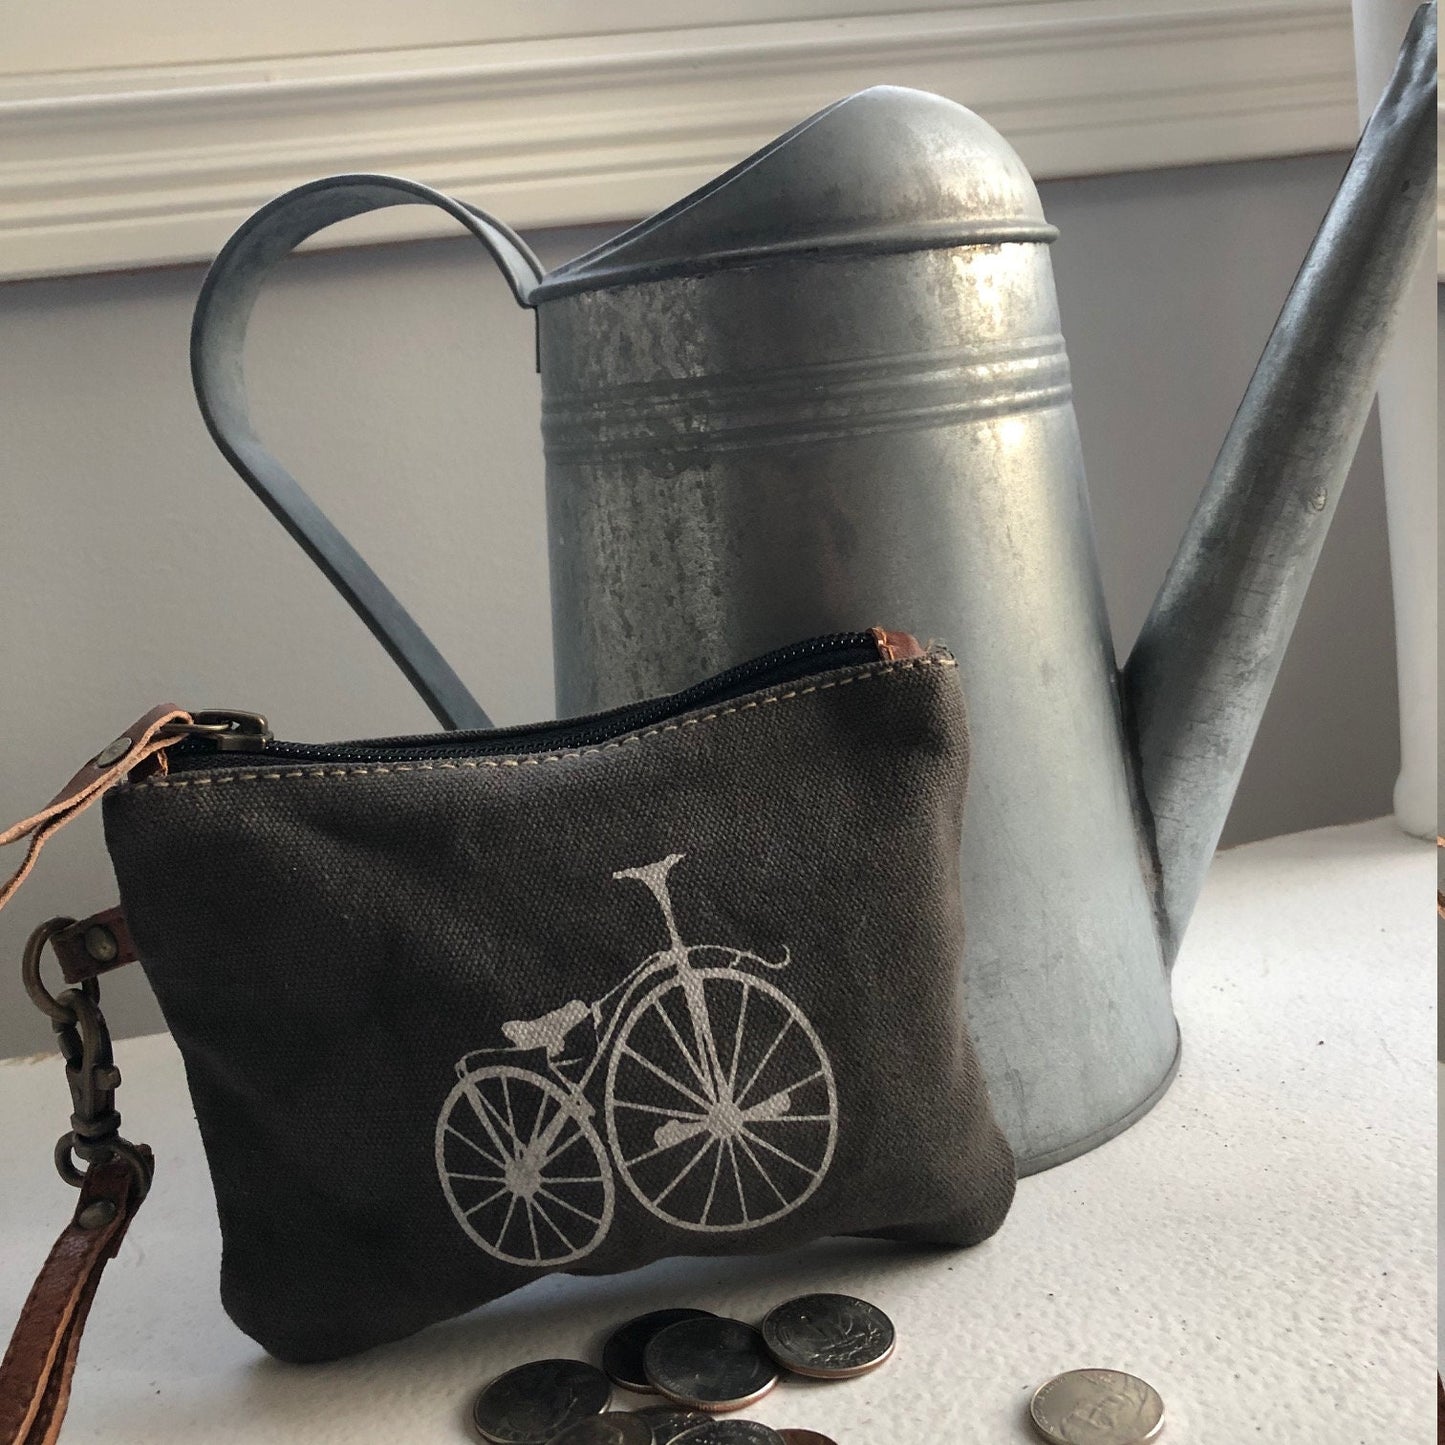 Upcycled Bicycle Sustainable Canvas Bag Coin Purse  - Small Wristlet or Make Up Bag